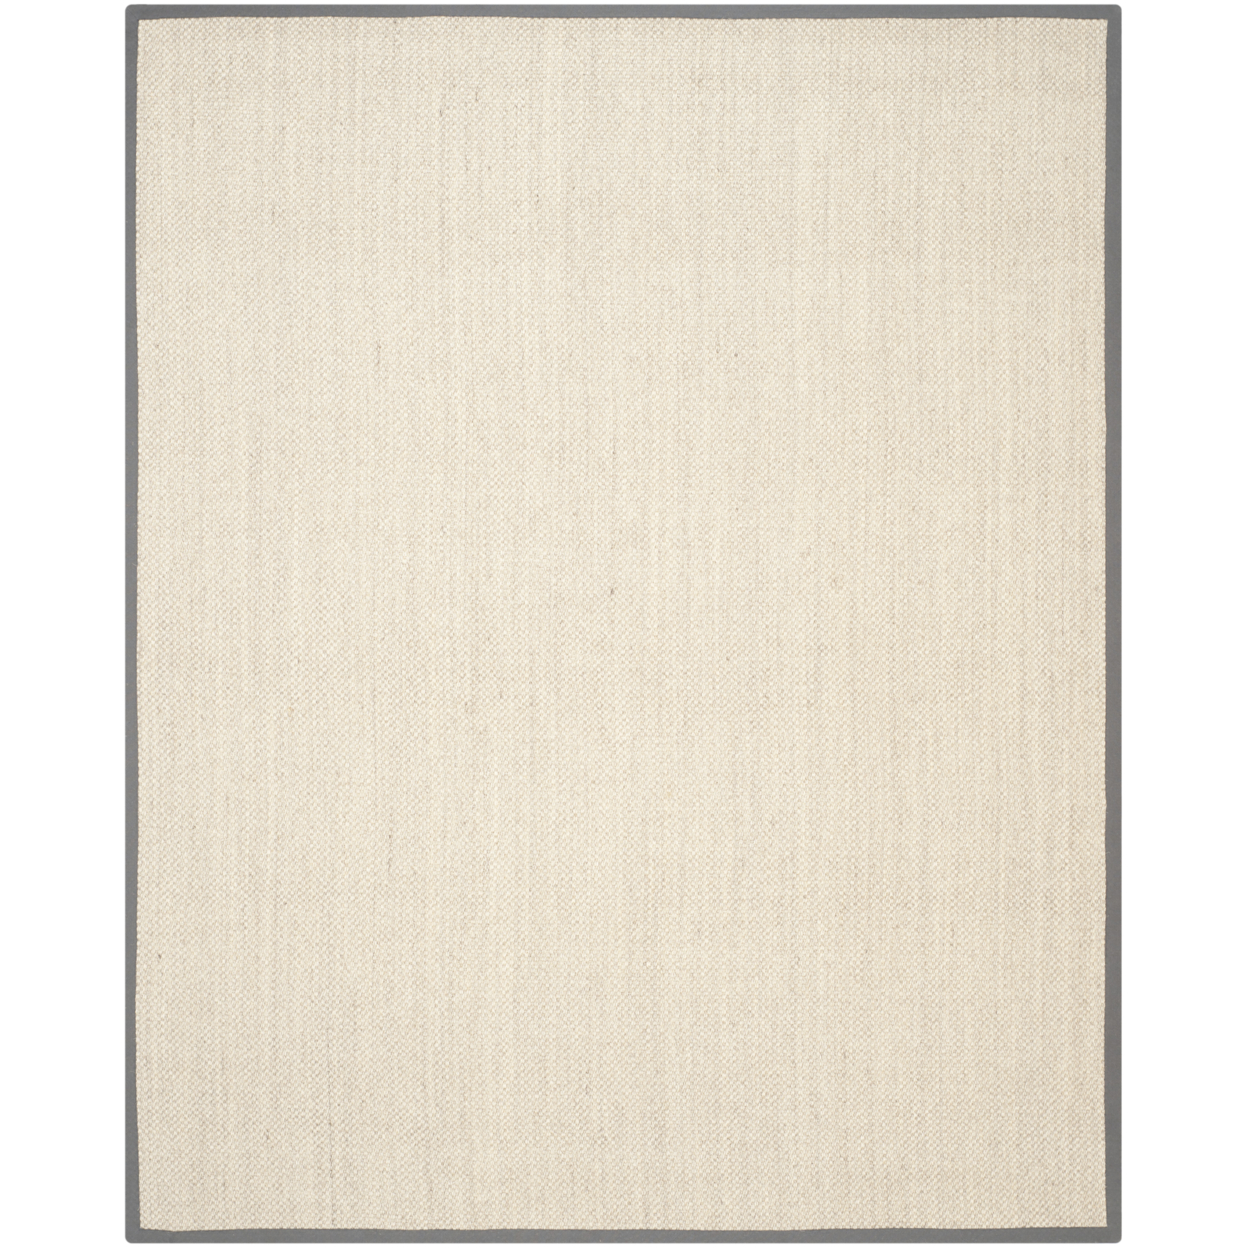 SAFAVIEH Natural Fiber Collection NF443B Marble/Grey Rug - 9' X 12'